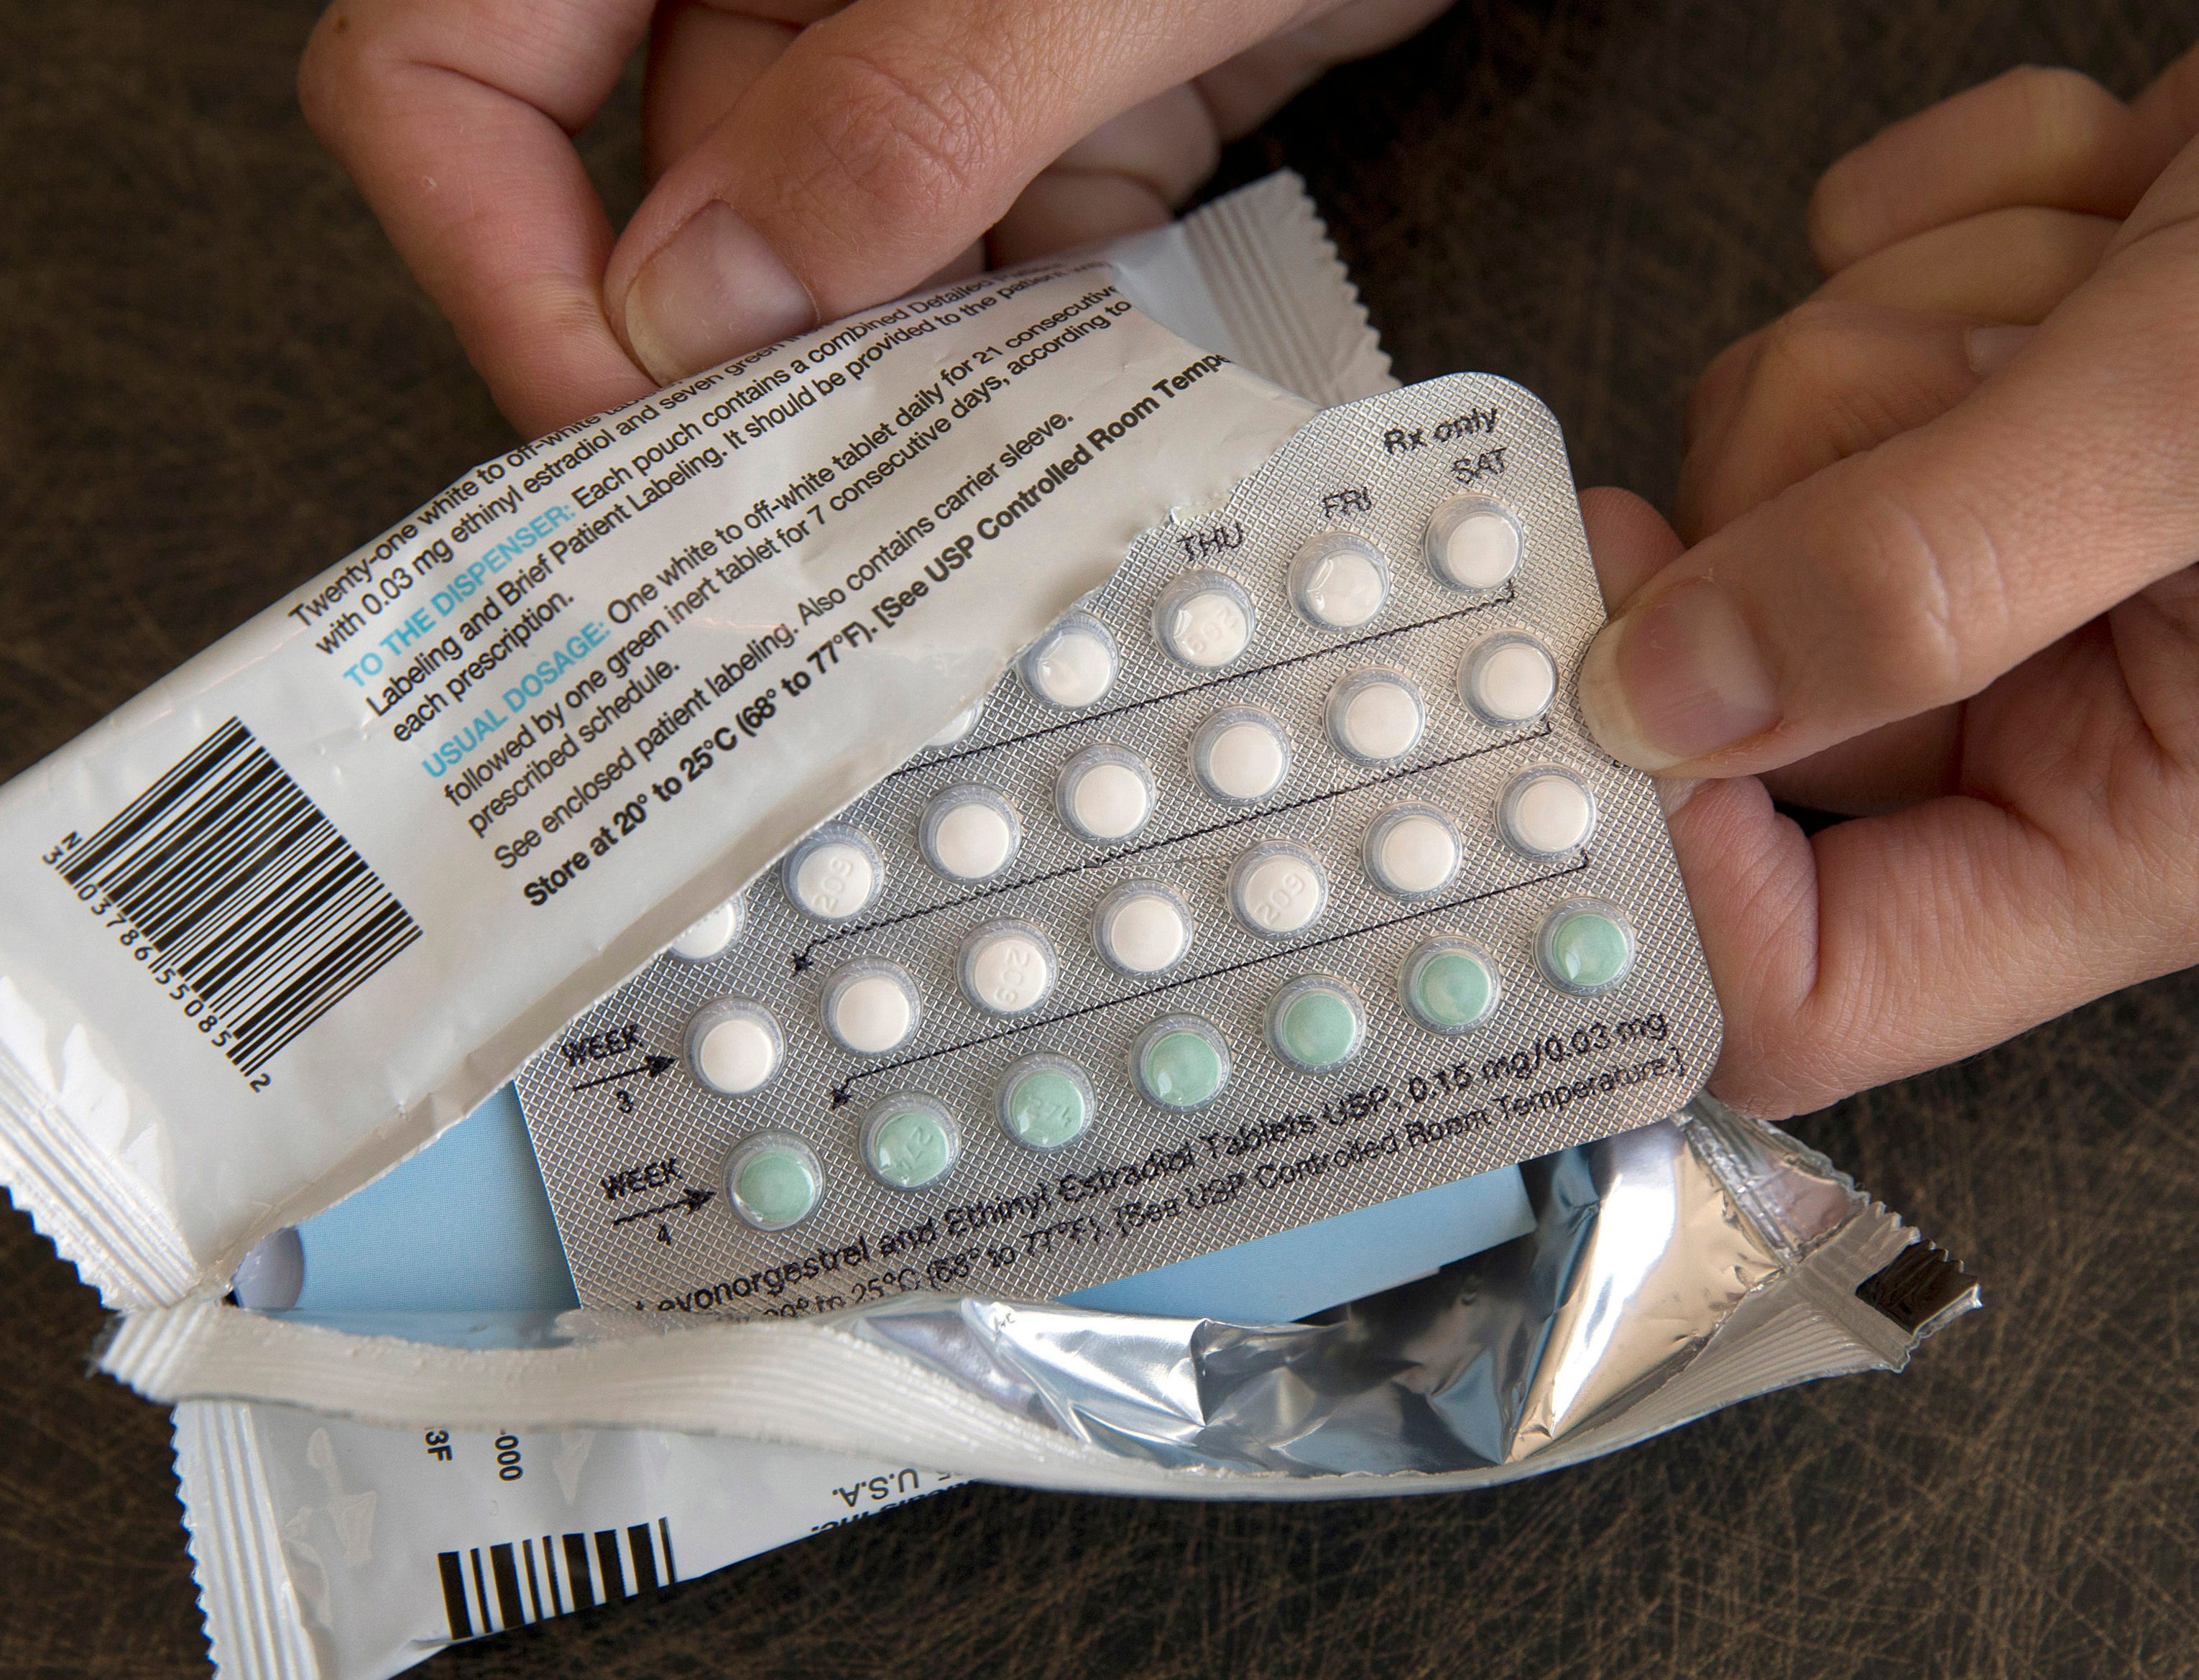 Birth control recall Tydemy pills recalled due to possibility of